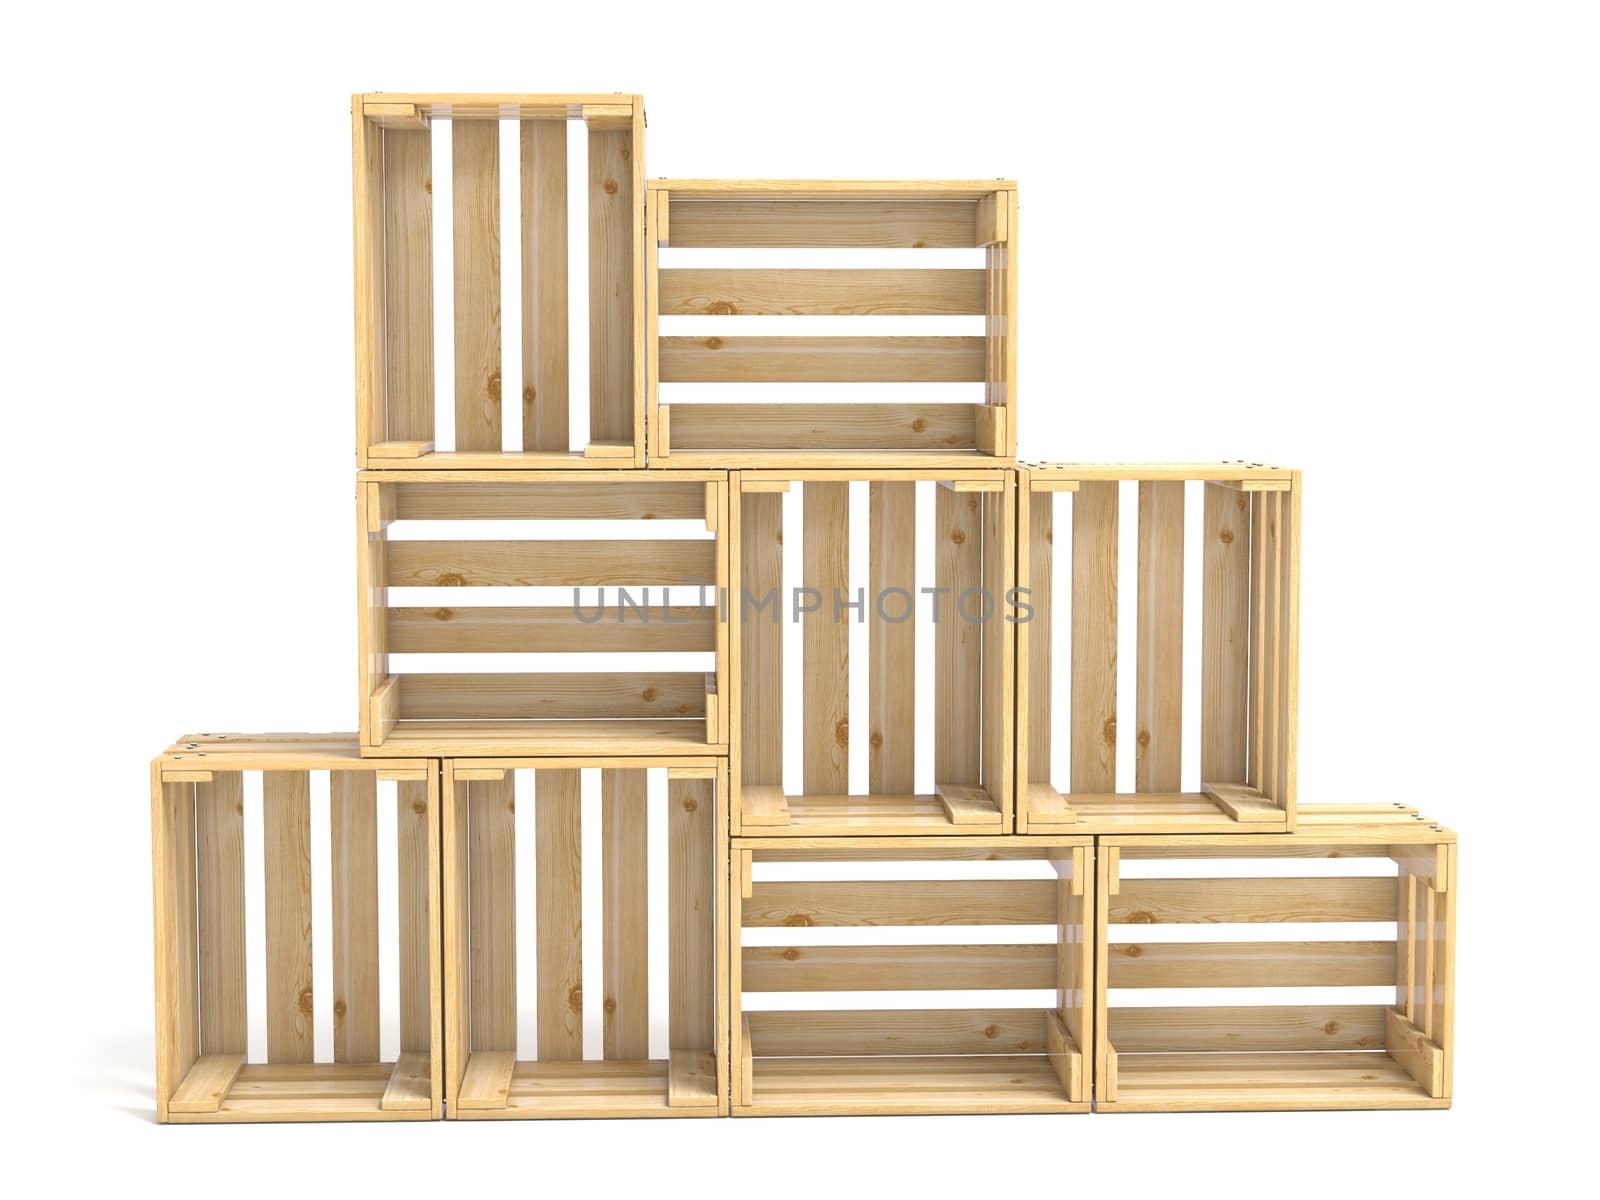 Empty wooden crates arranged 3D render illustration isolated on white background